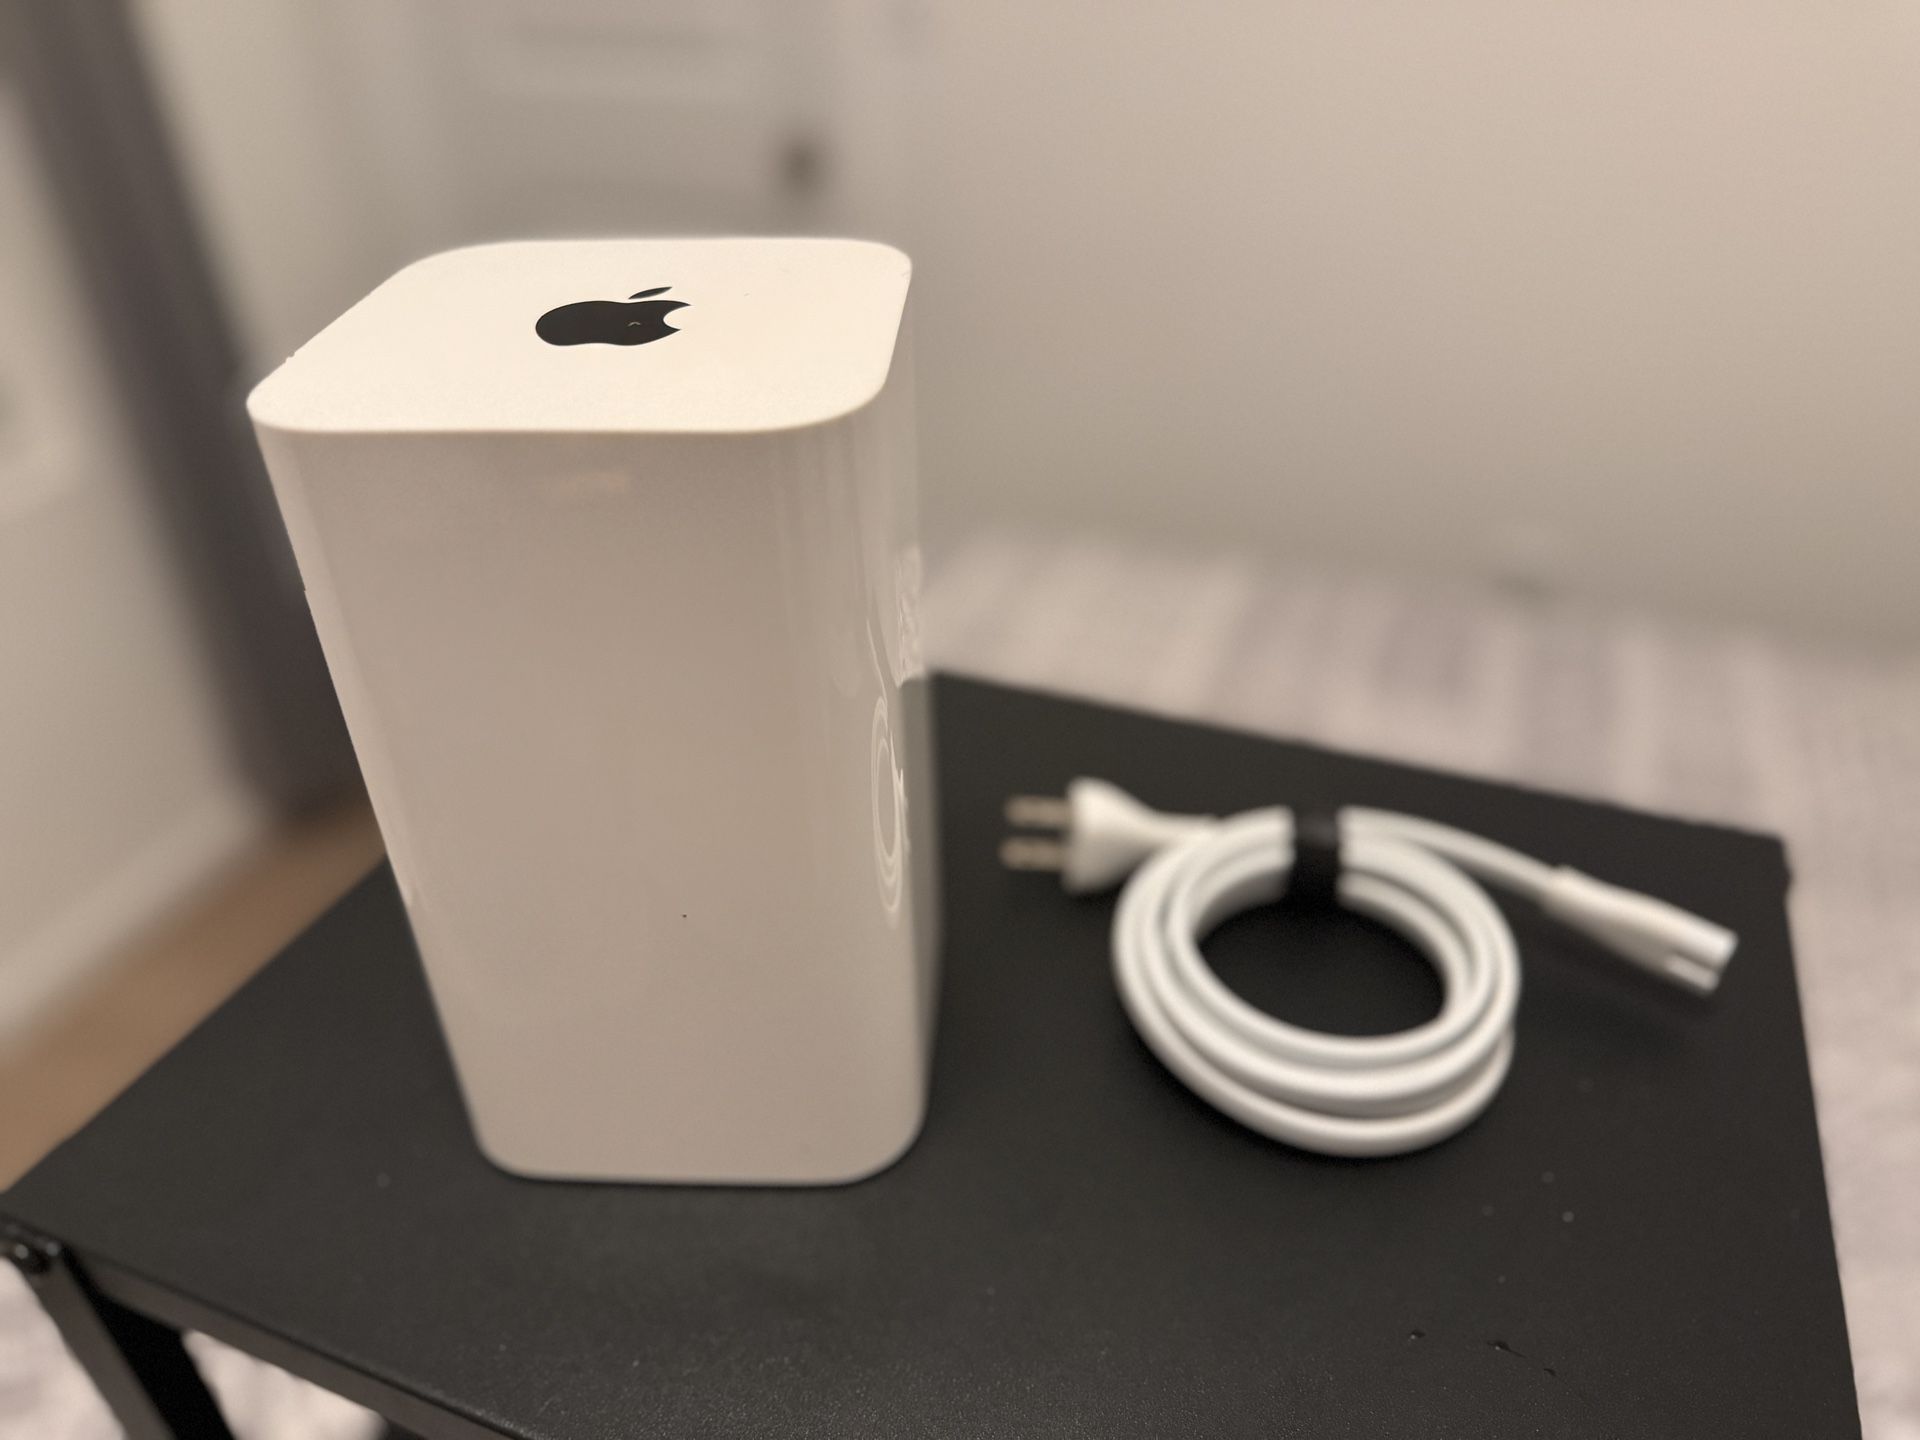 Apple AirPort Extreme WiFi Router 802.11ac